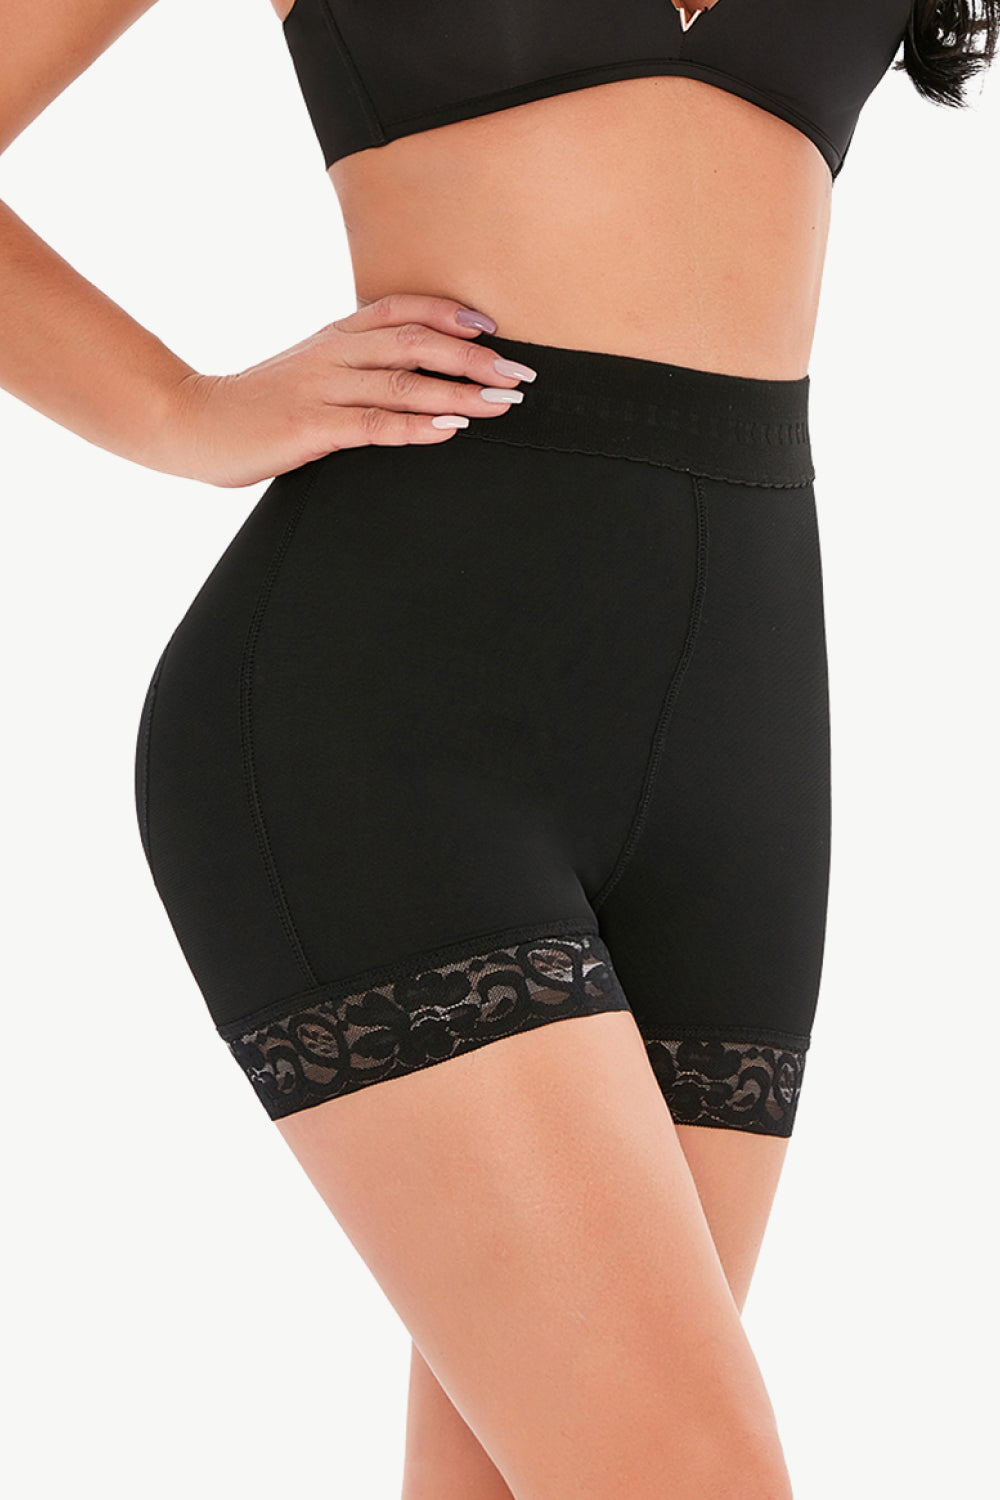 spandex shorts with lace trim